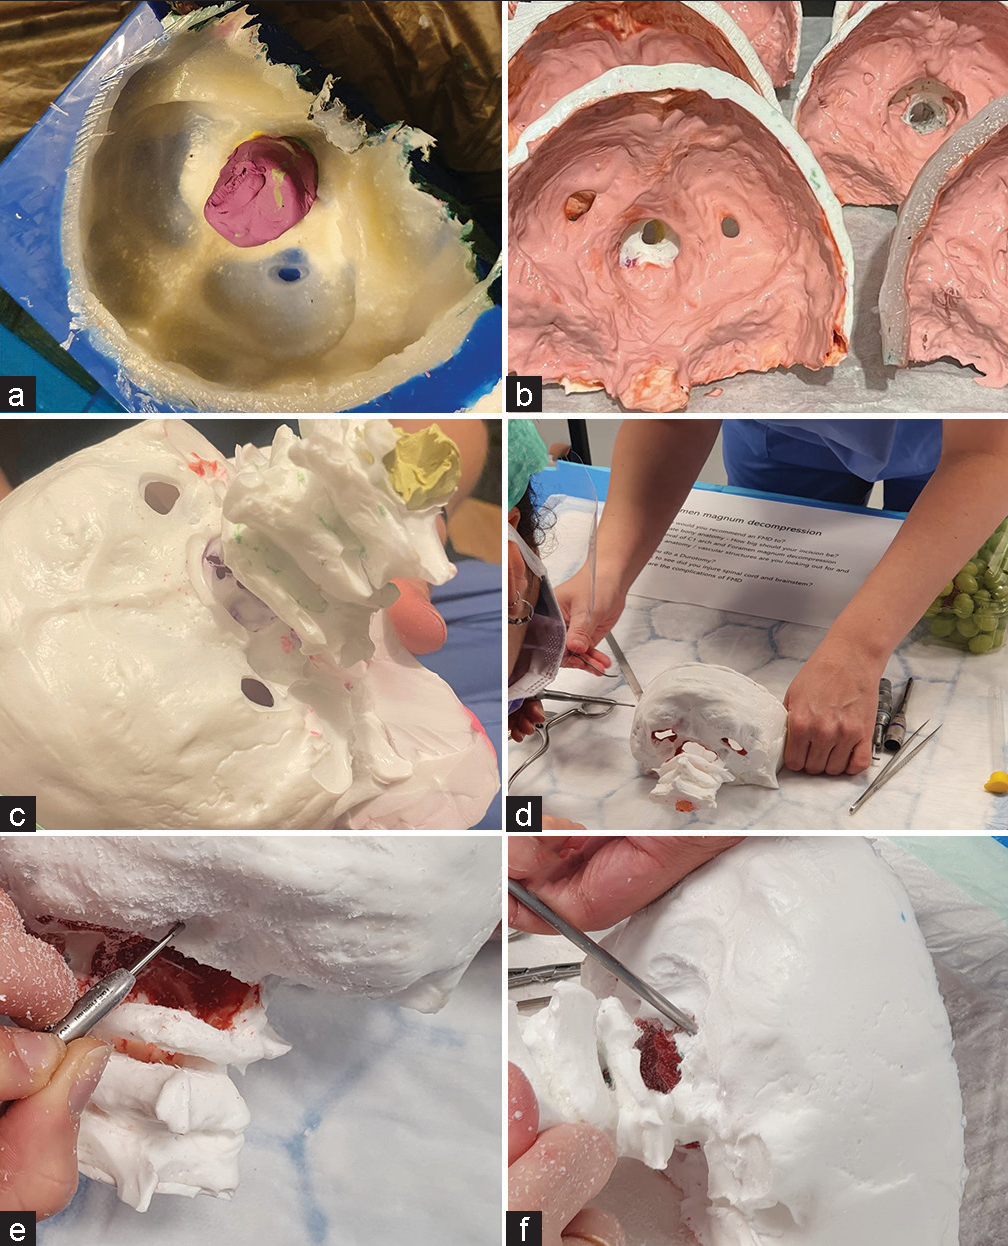 An inexpensive foramen magnum decompression training tool: Feasibility and validation study